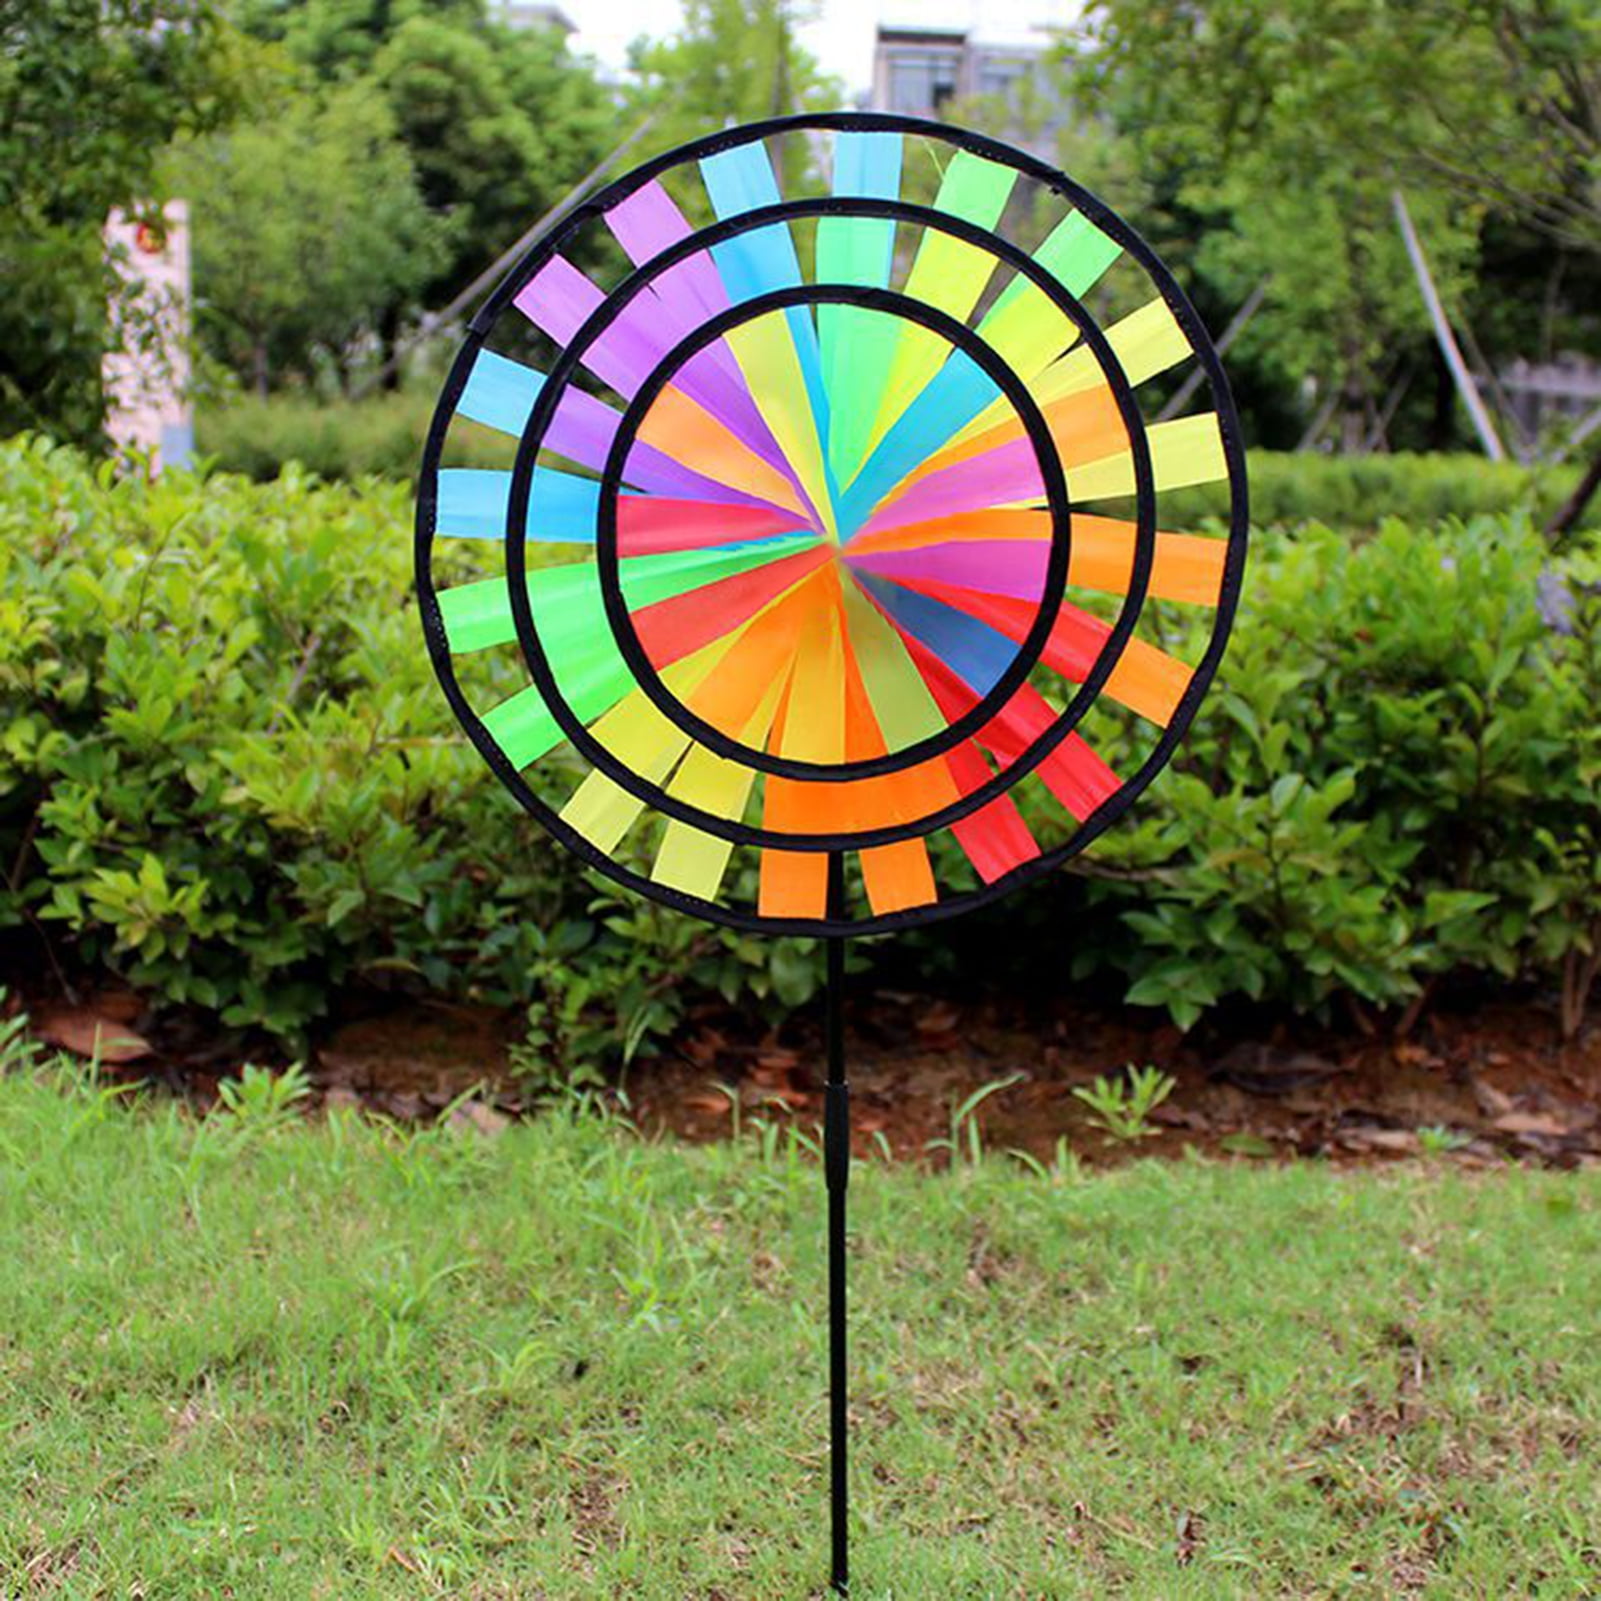 WIND TWISTER DECORATION CIRCLE Shaped Rainbow Colors Garden Decor Outdoors New I 